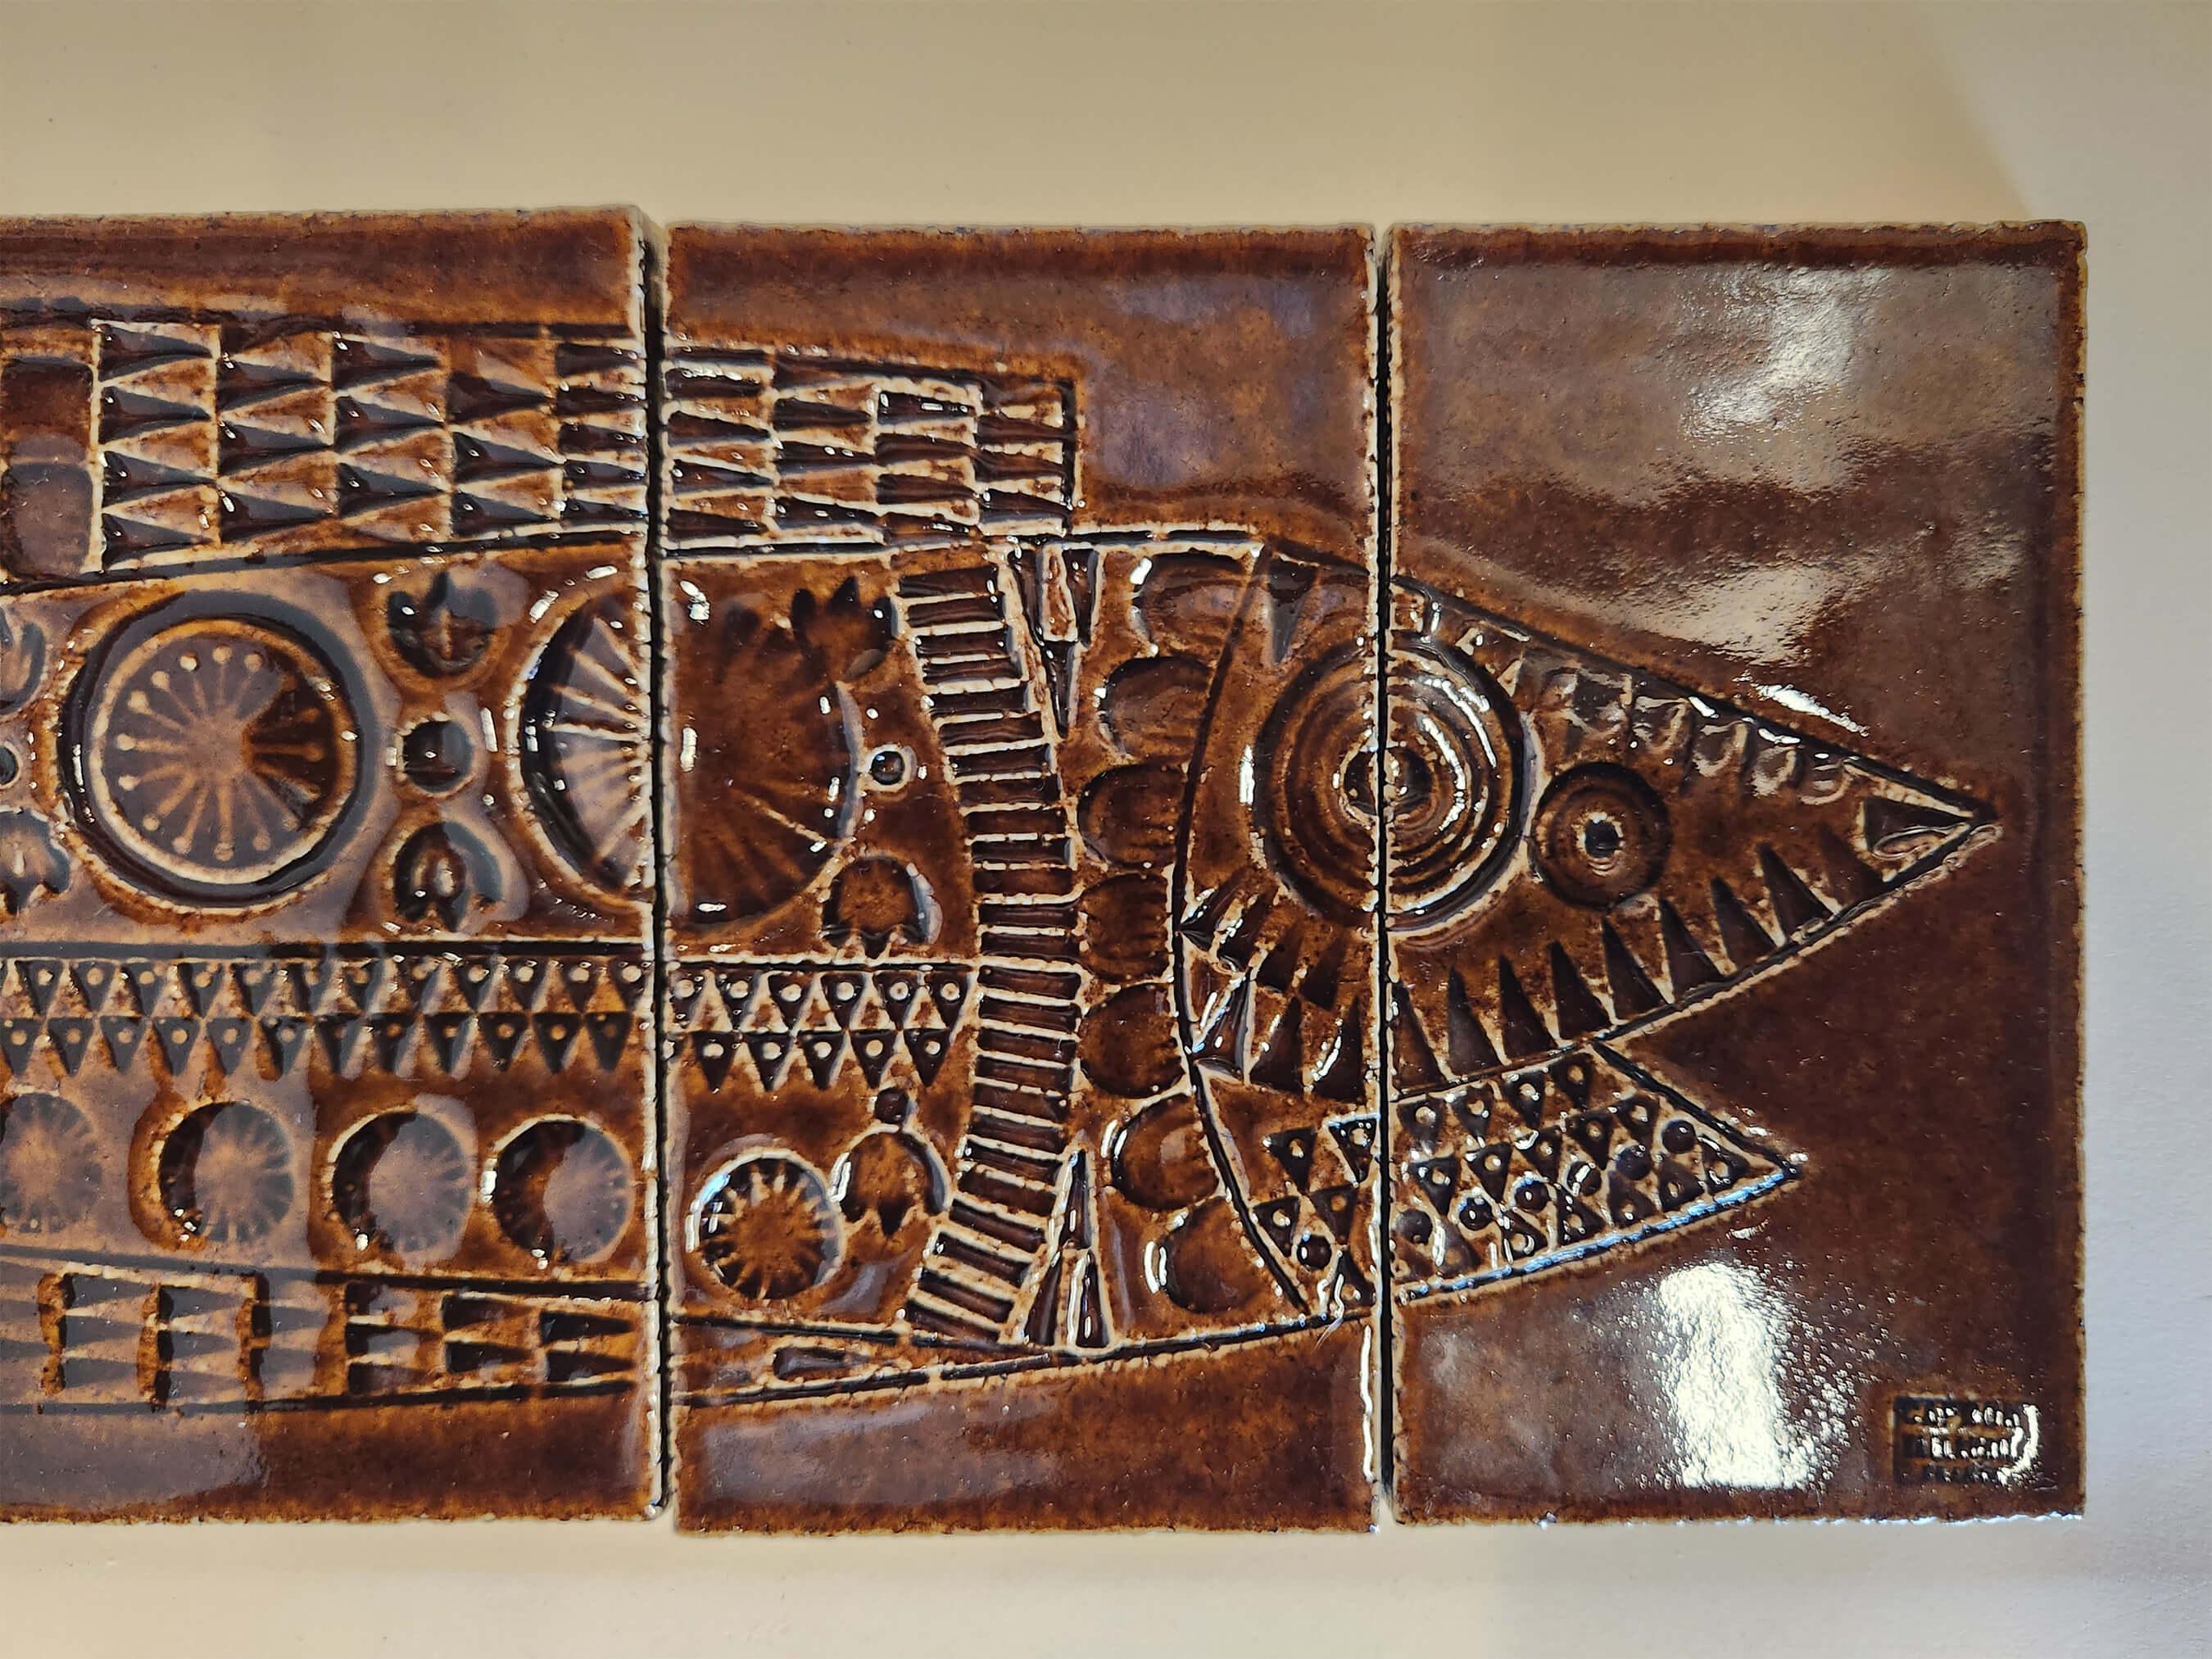 20th Century Roger Capron Panel with 5 Ceramic Tiles - FISH For Sale